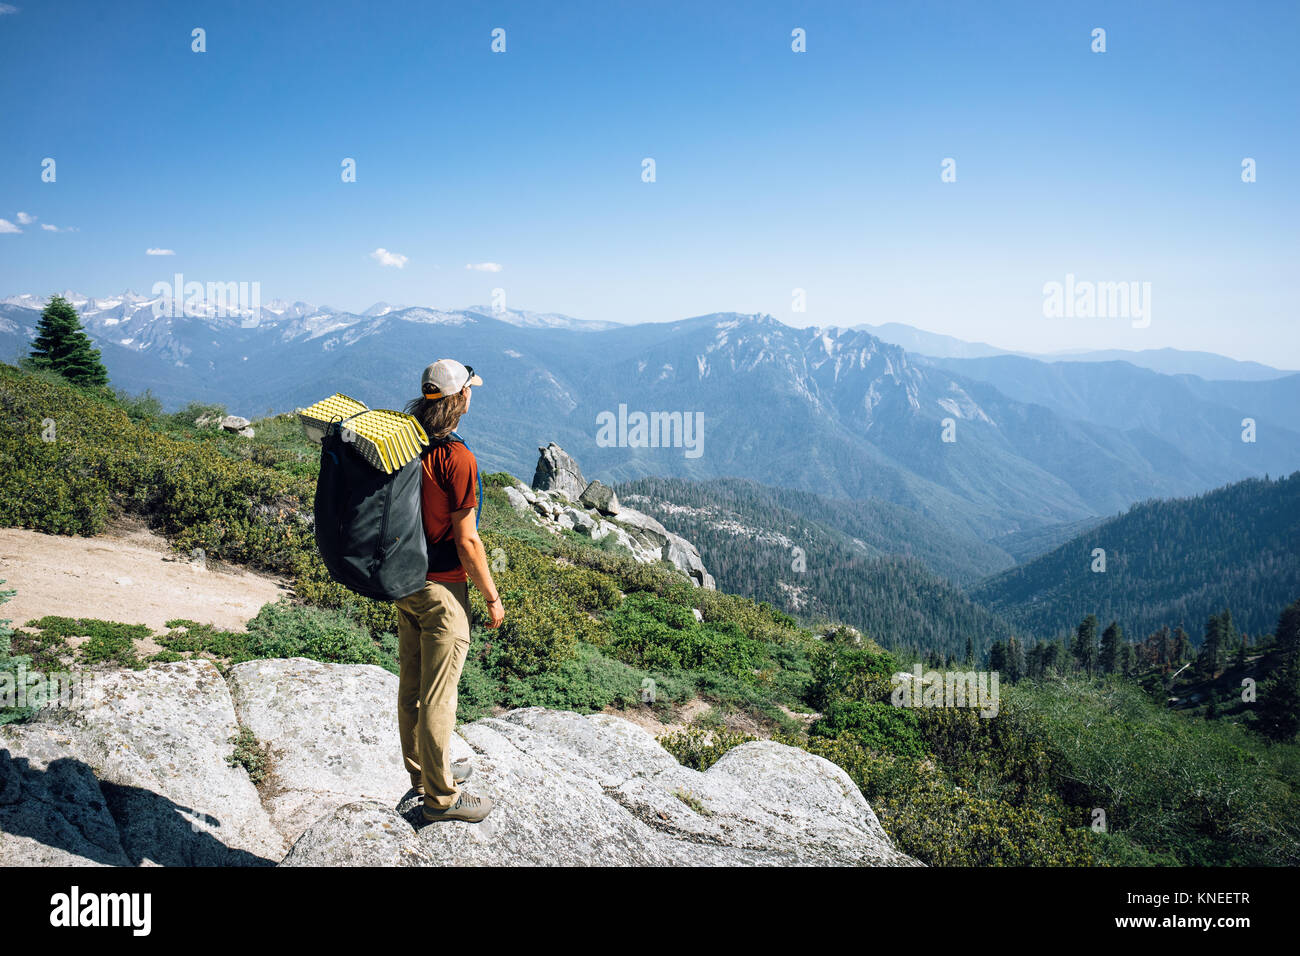 Hiker looking Towards Great Western Divide, Sequoia National Park, California, United States Stock Photo